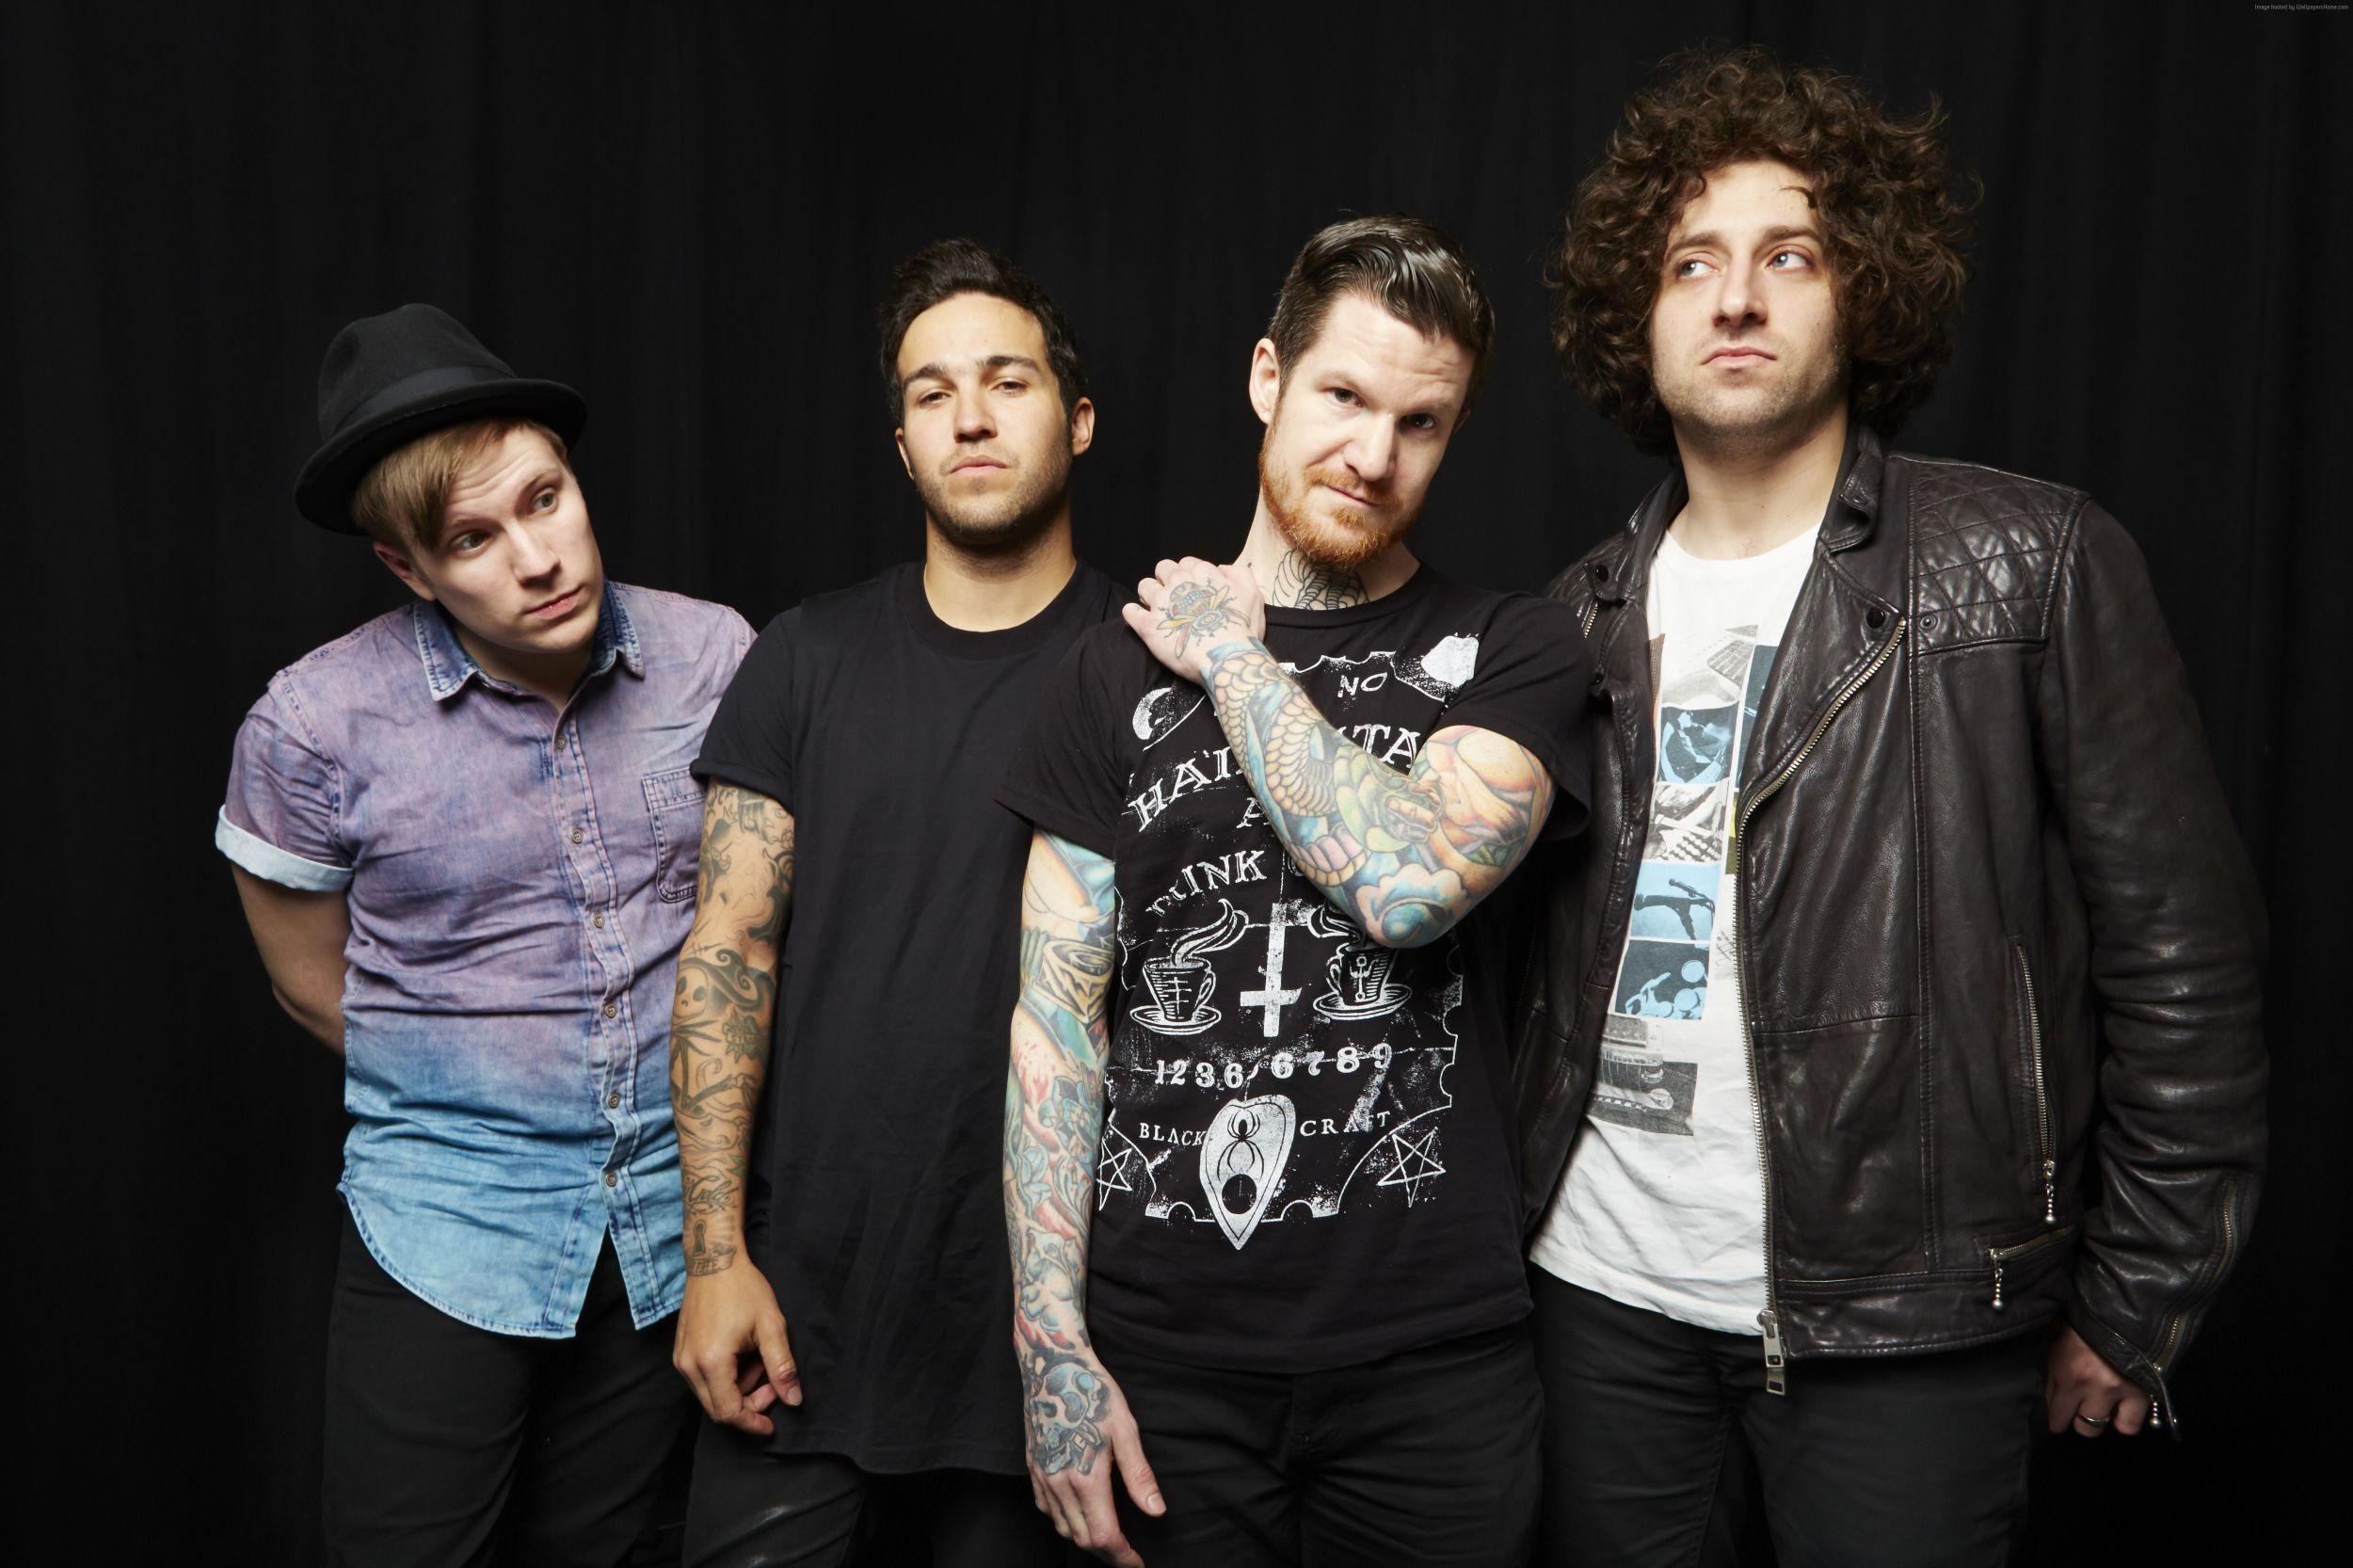 Download 5760x3840 Fall Out Boy HD Wallpaper for Free